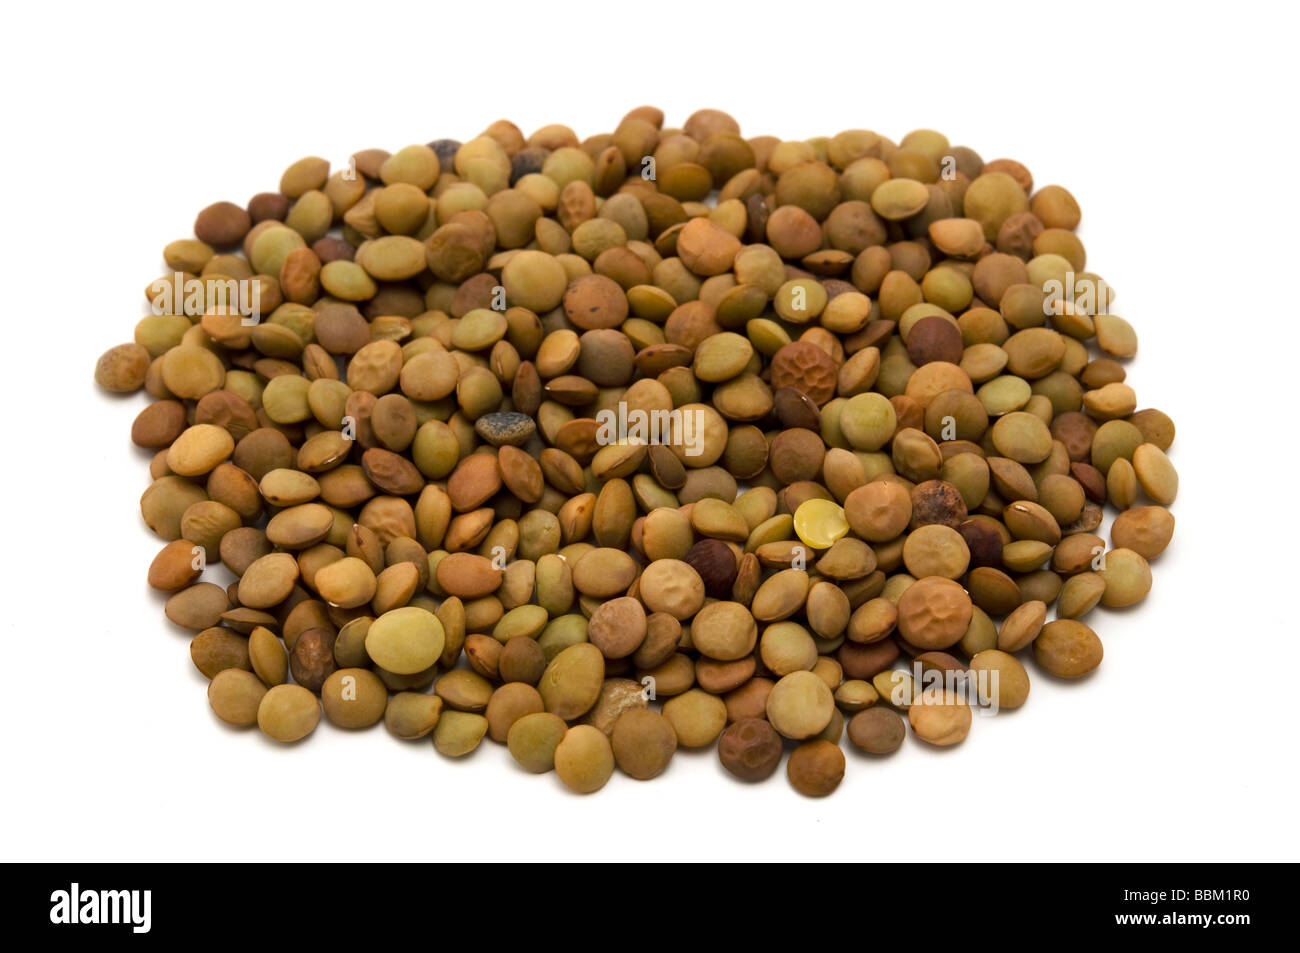 Lentils on a white background Stock Photo